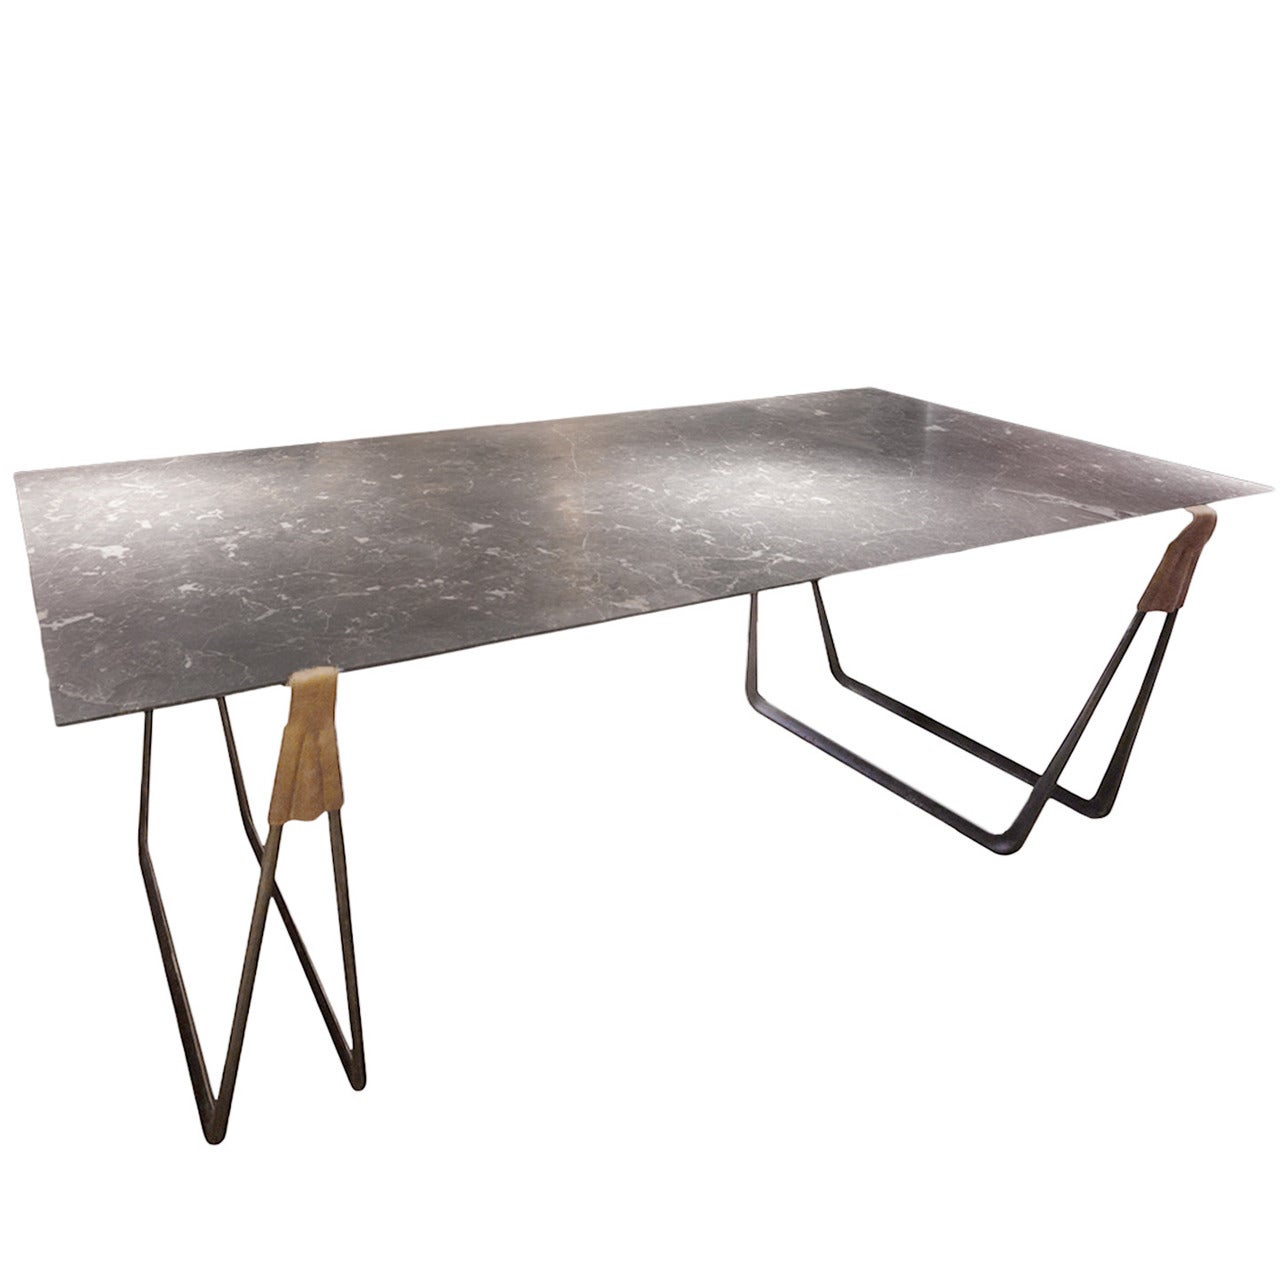 Marble and Steel Trestle Table "InVein" by Ben Storms, 2014 For Sale